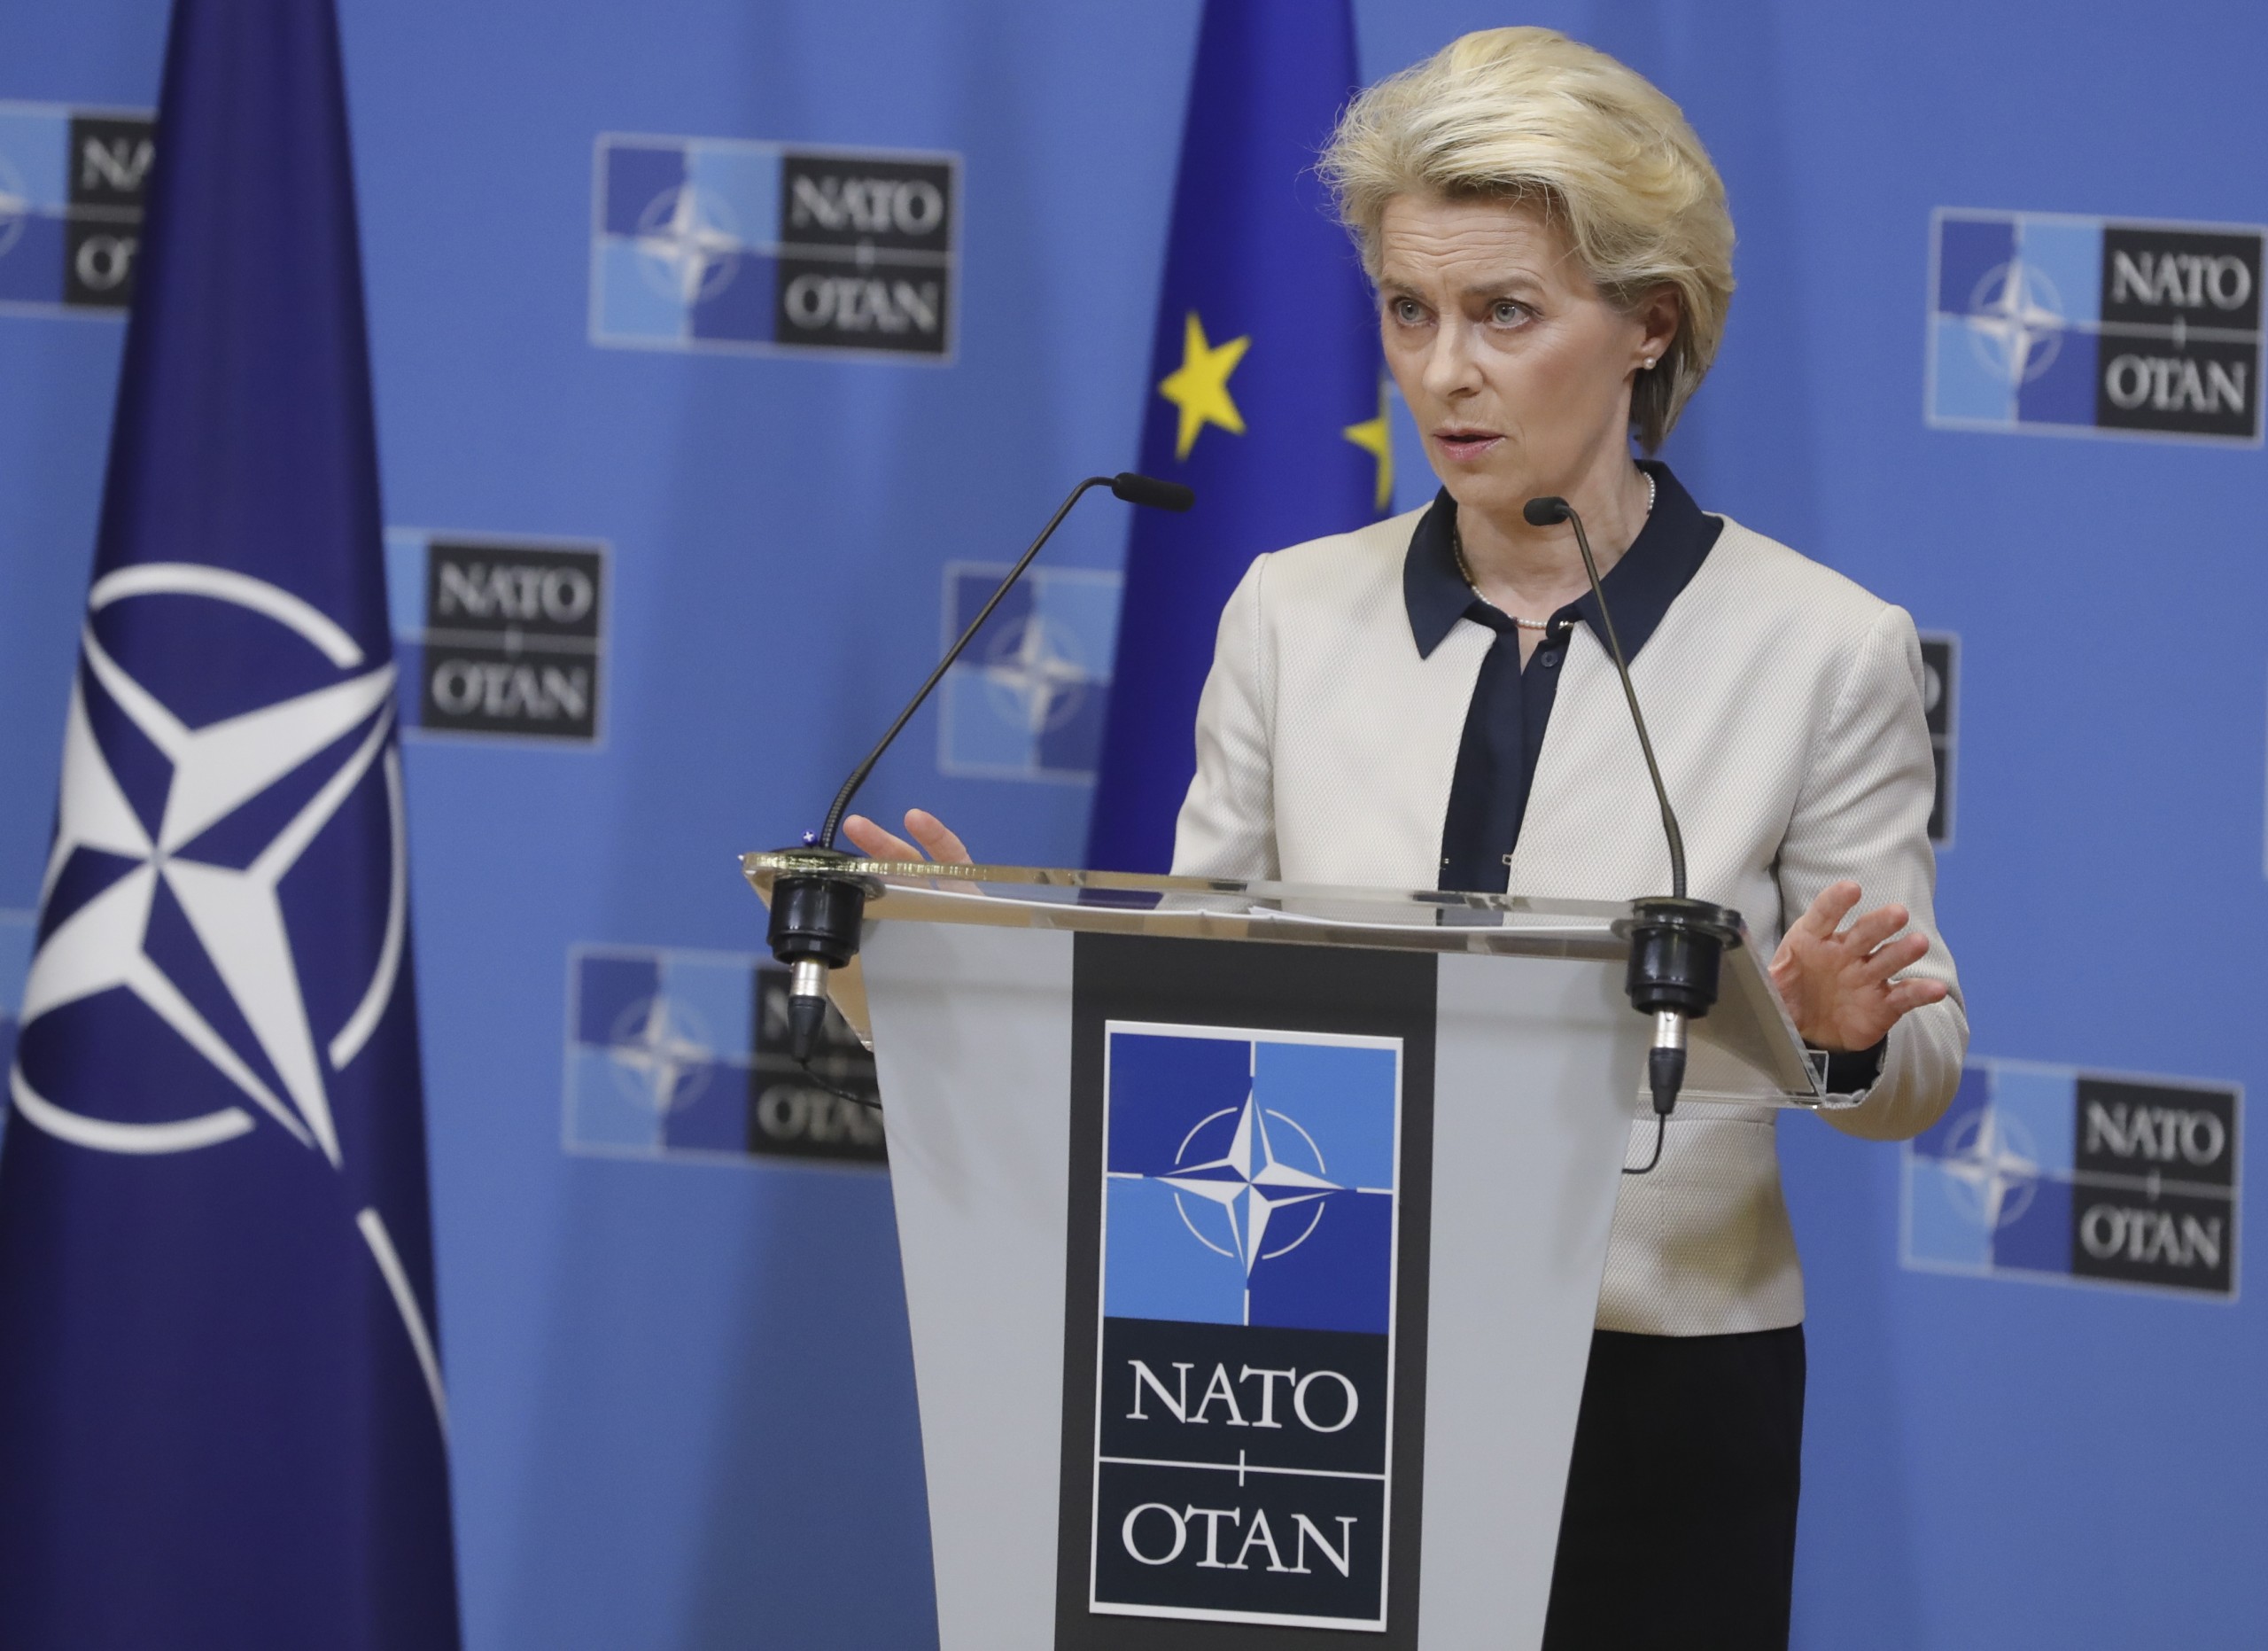 epa09780786 European Commission President Ursula von der Leyen speaks during a press conference following a special North Atlantic Council (NAC) meeting in light of Russia's aggression against Ukraine, in Brussels, Belgium, 24 February 2022. Russian troops entered Ukraine on 24 February prompting the country's president to declare martial law.  EPA/STEPHANIE LECOCQ